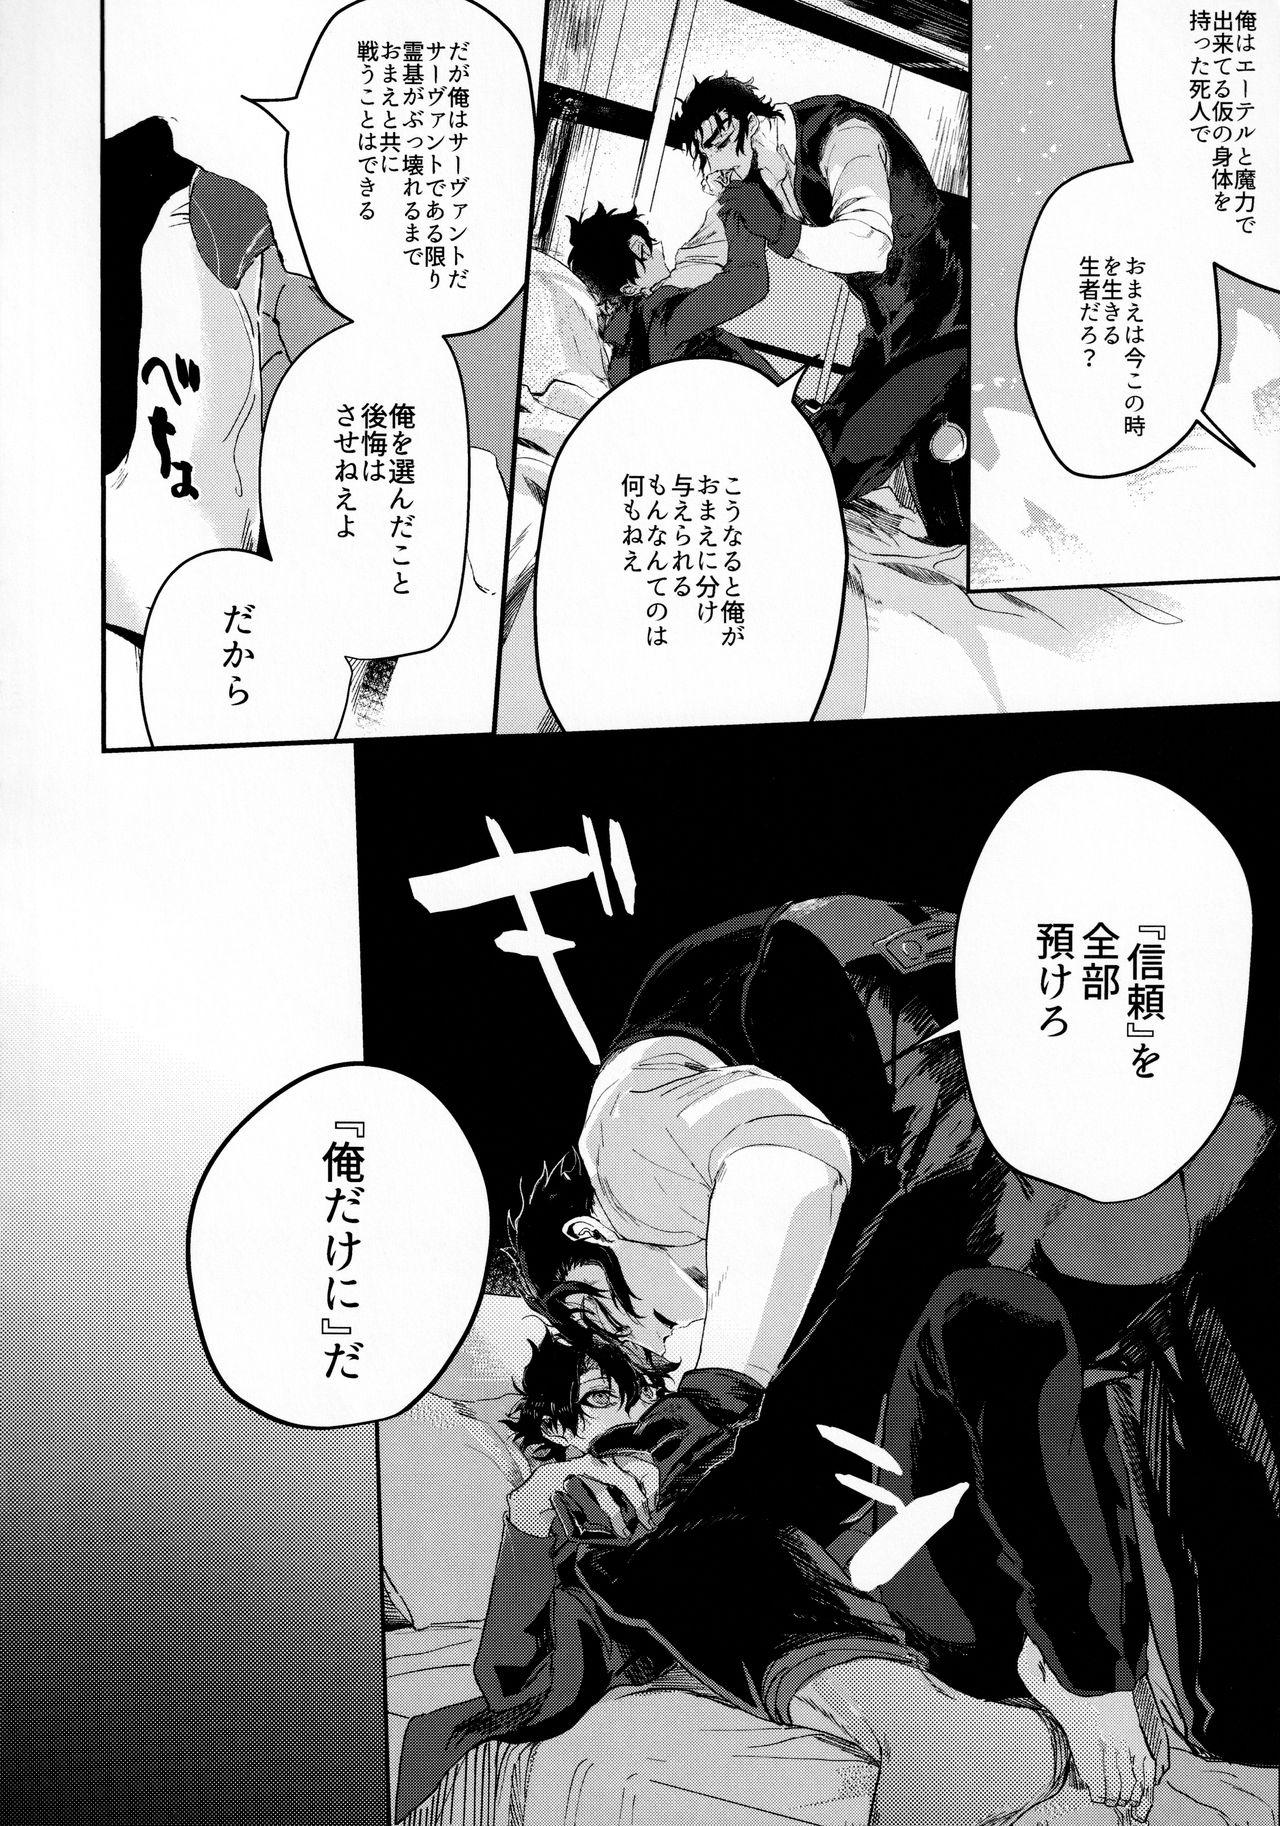 Big Ass 耽溺と熱 - Fate grand order Time - Page 11